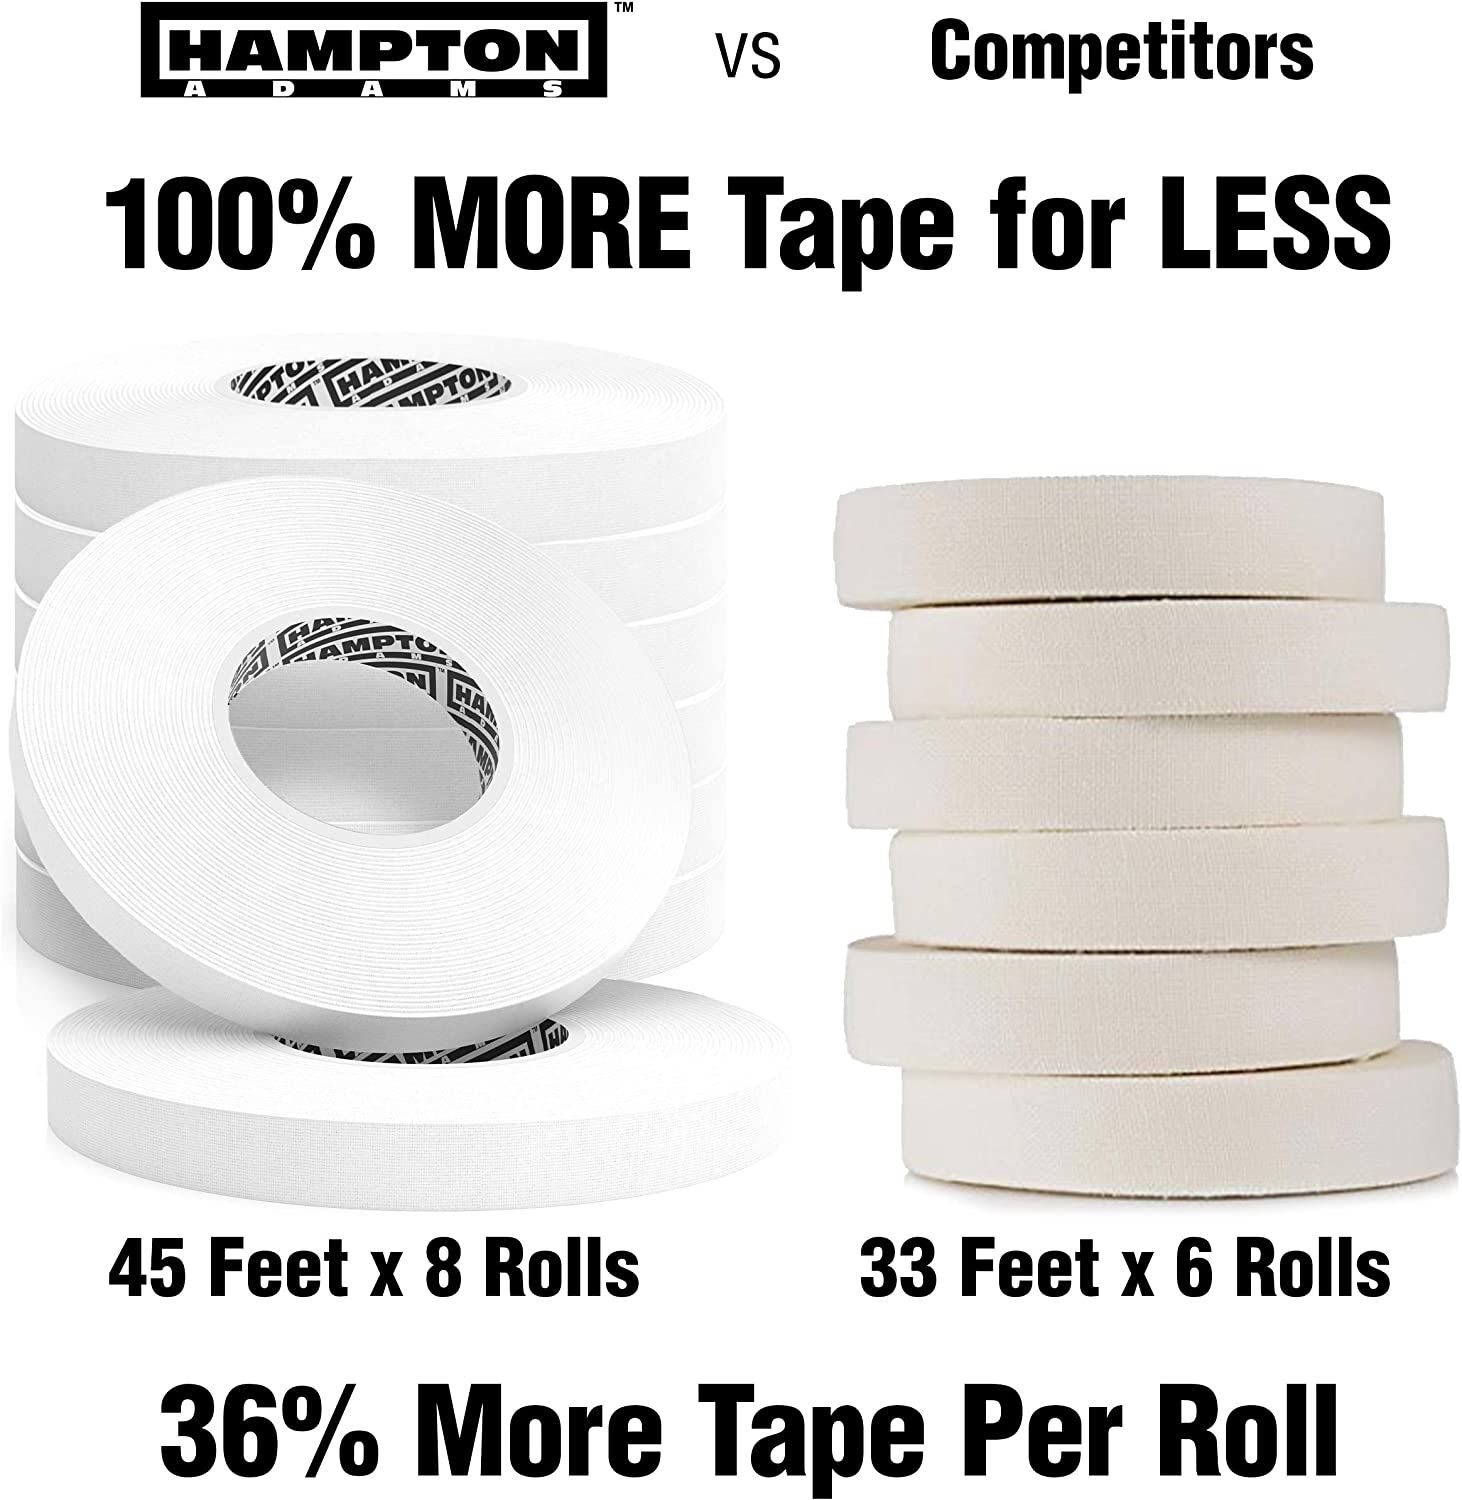 Athletic Tape White Extremely Strong: 3 Rolls + 1 Finger Tape. Easy to  Apply & No Sticky Residue. Sports Tape for Boxing, Football or Climbing.